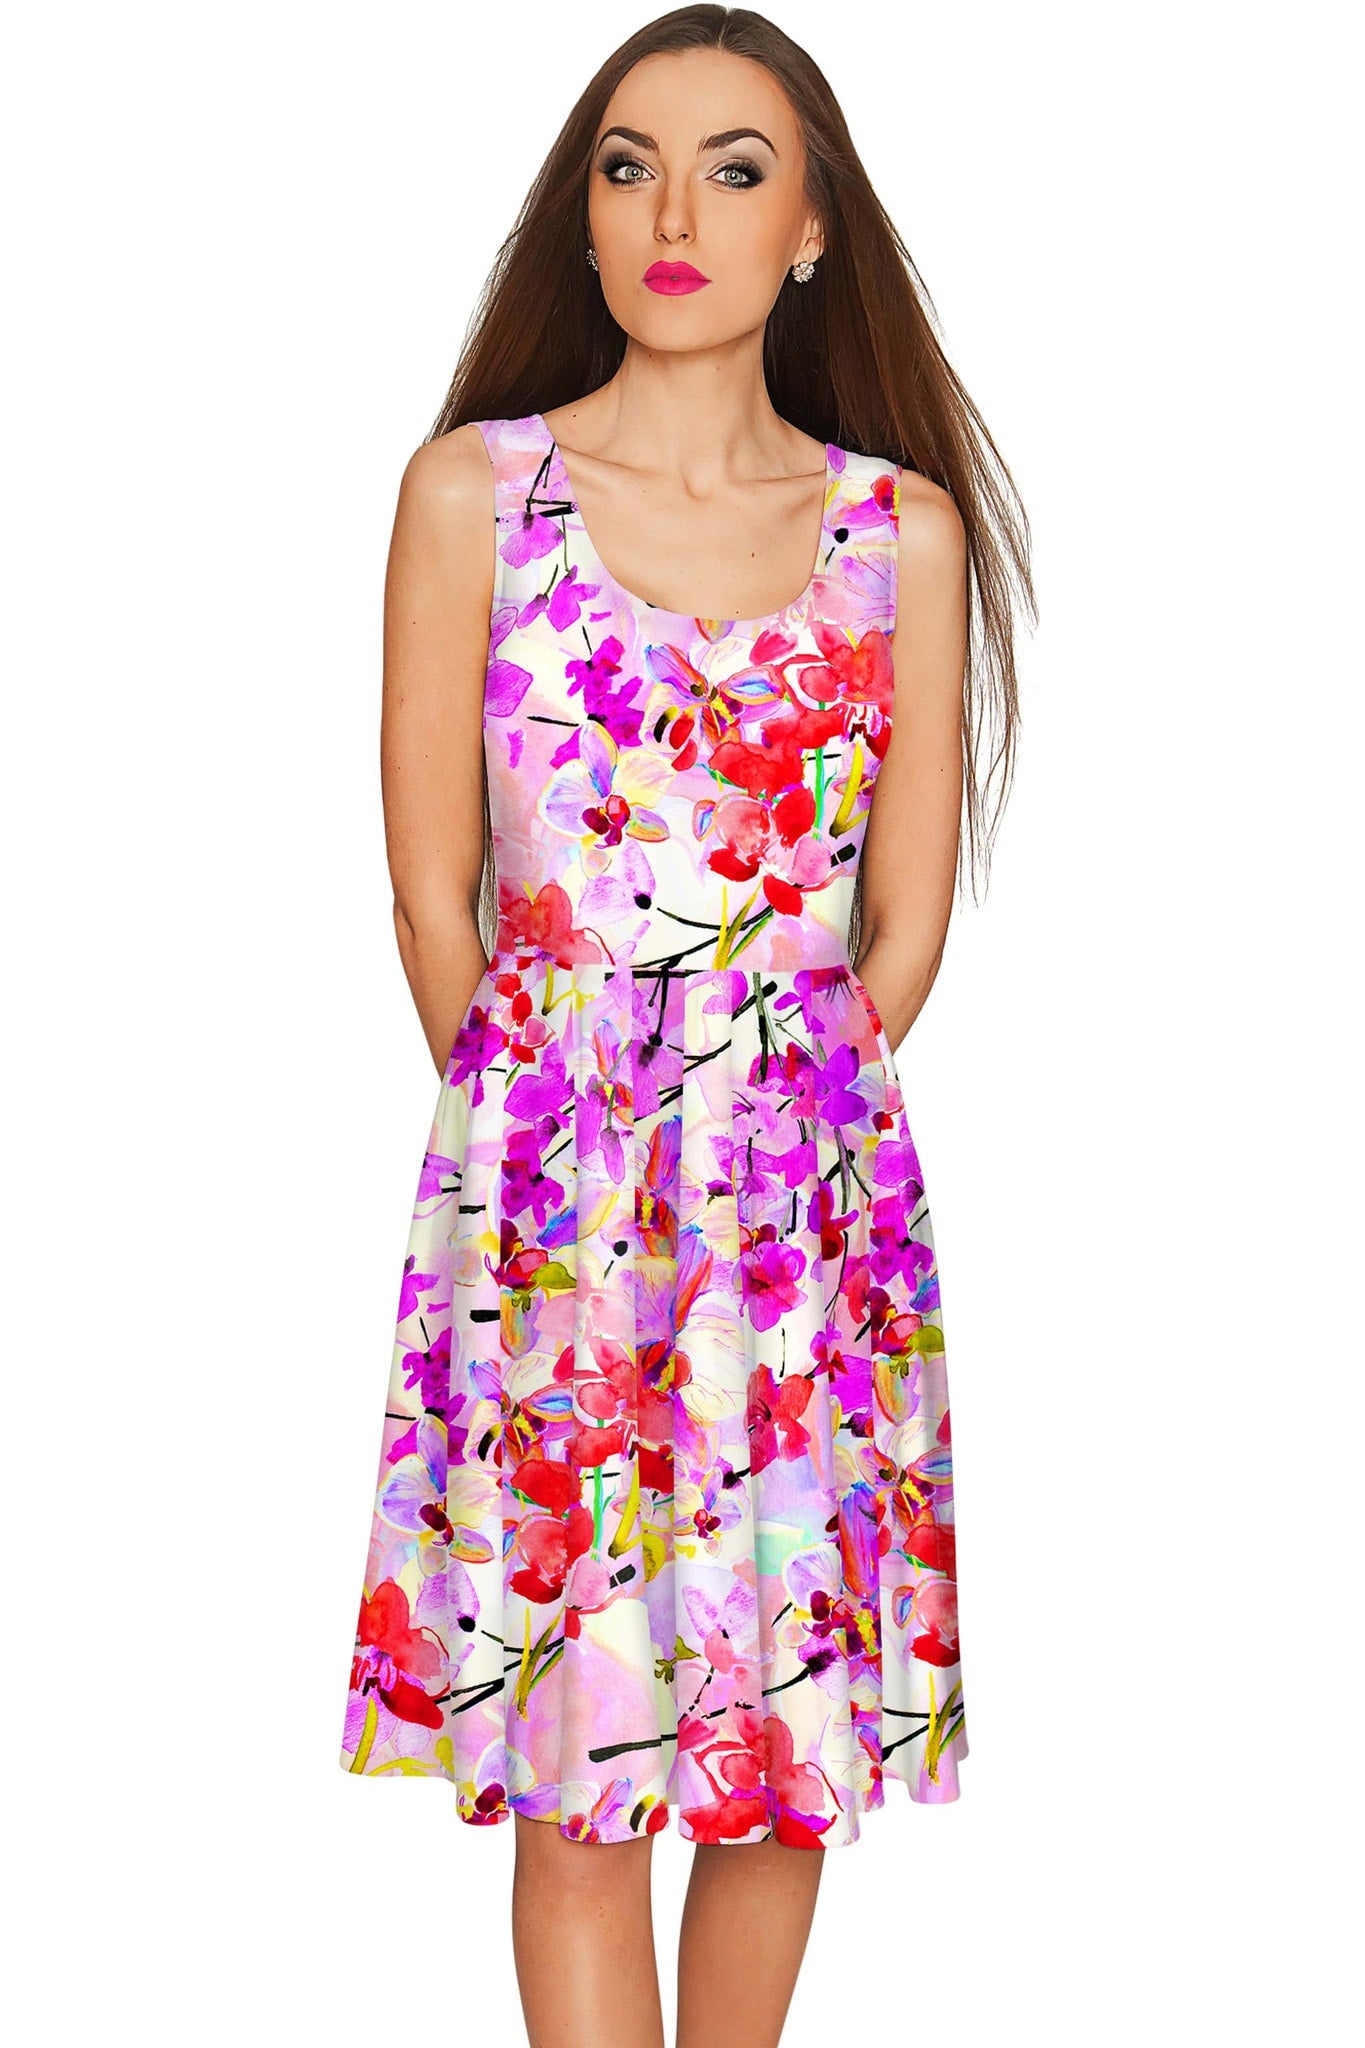 Orchid Caprice Mia Fit & Flare Pink Floral Dress - Women - Pineapple Clothing